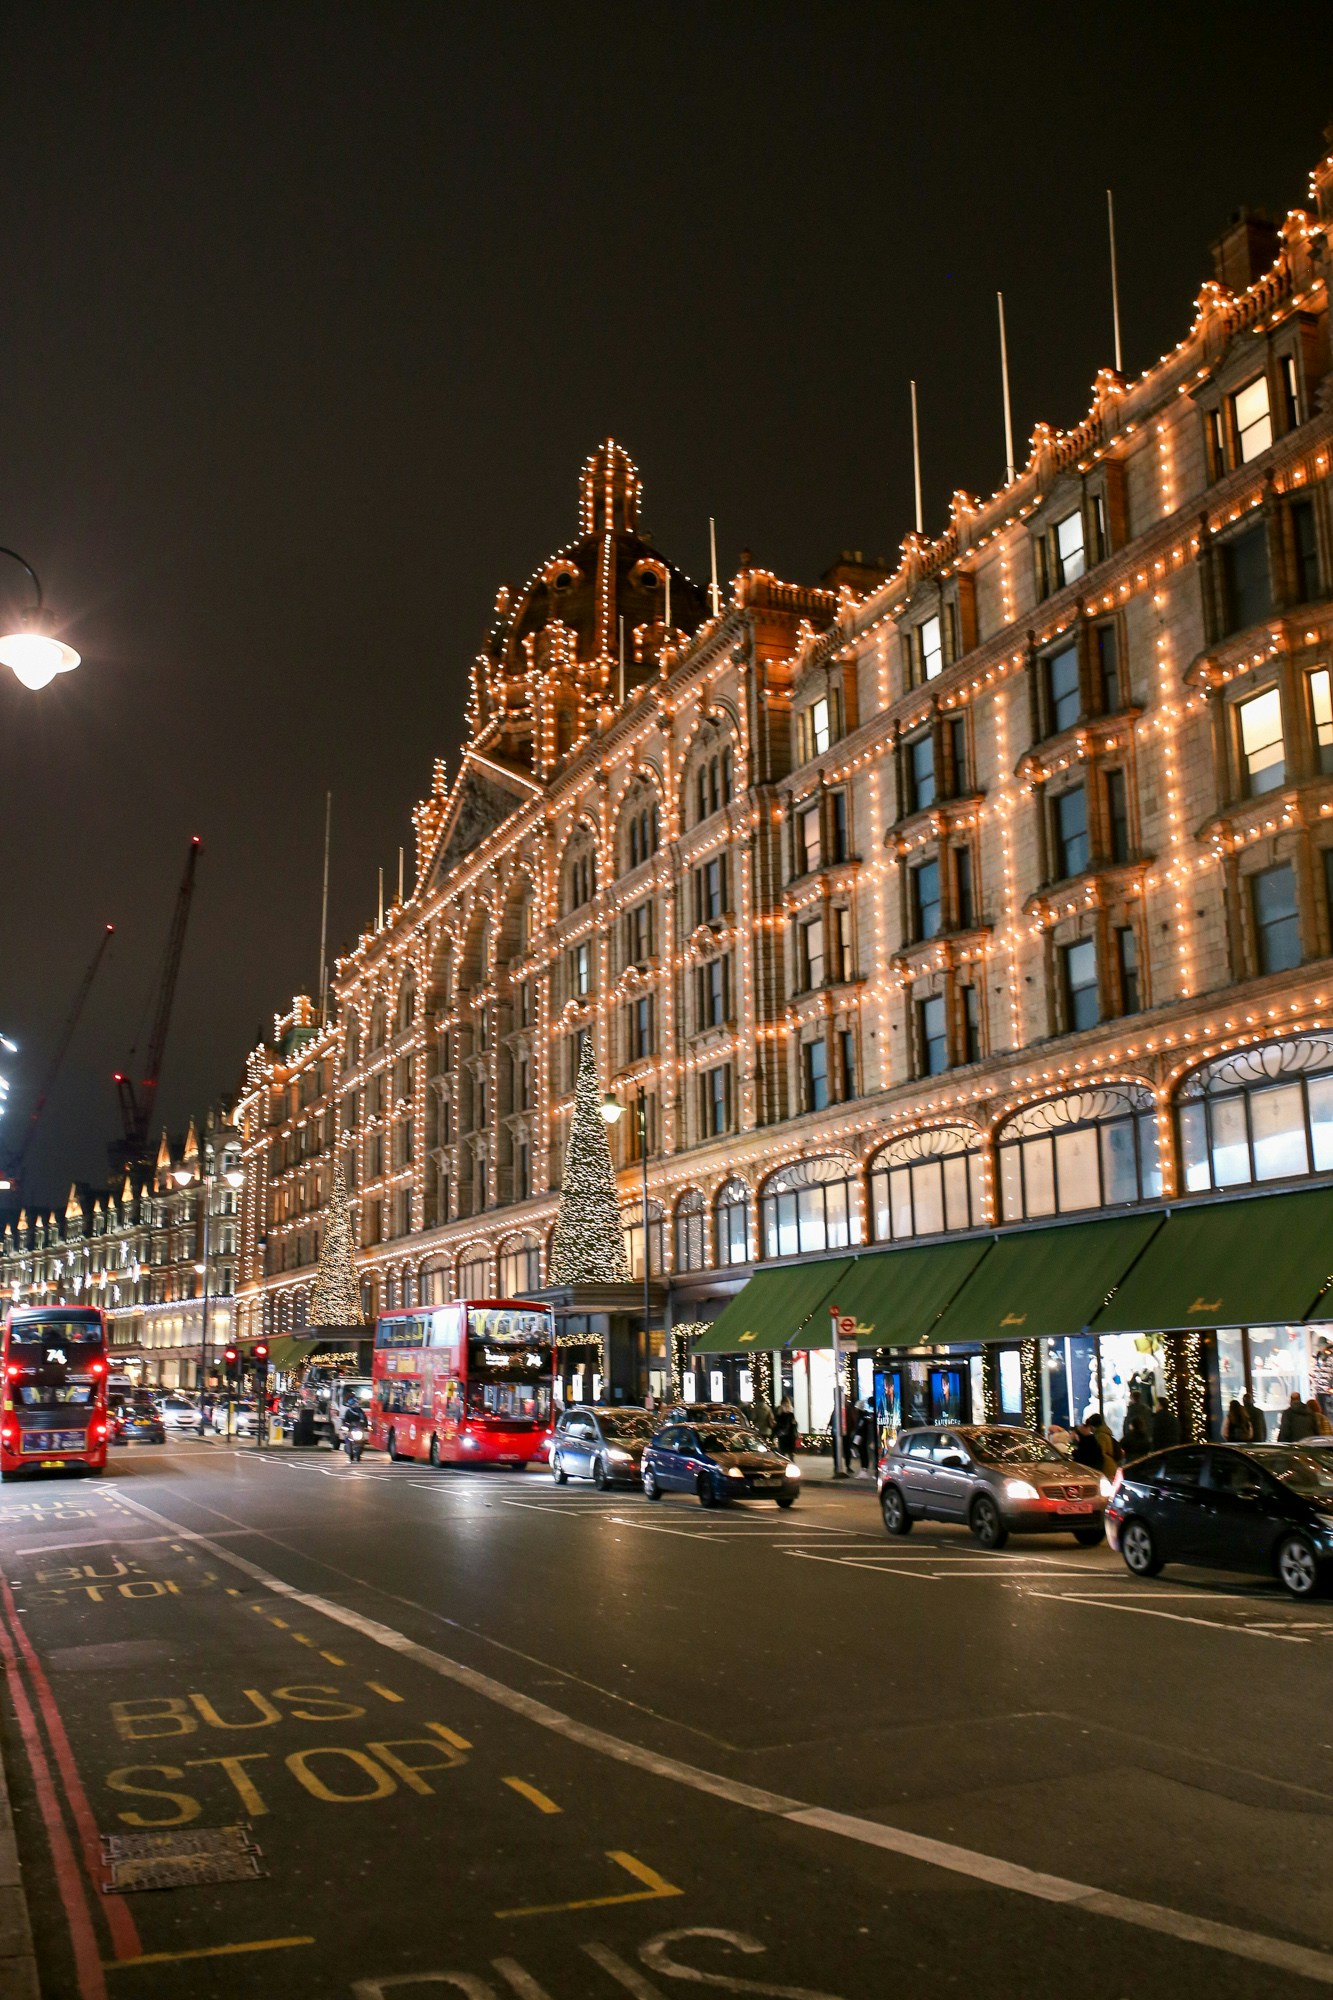 Harrods lit up for the Christmas Holidays is a magical sight. Hotel Xenia London is located a 15 minute walk from Harrods Department store. 